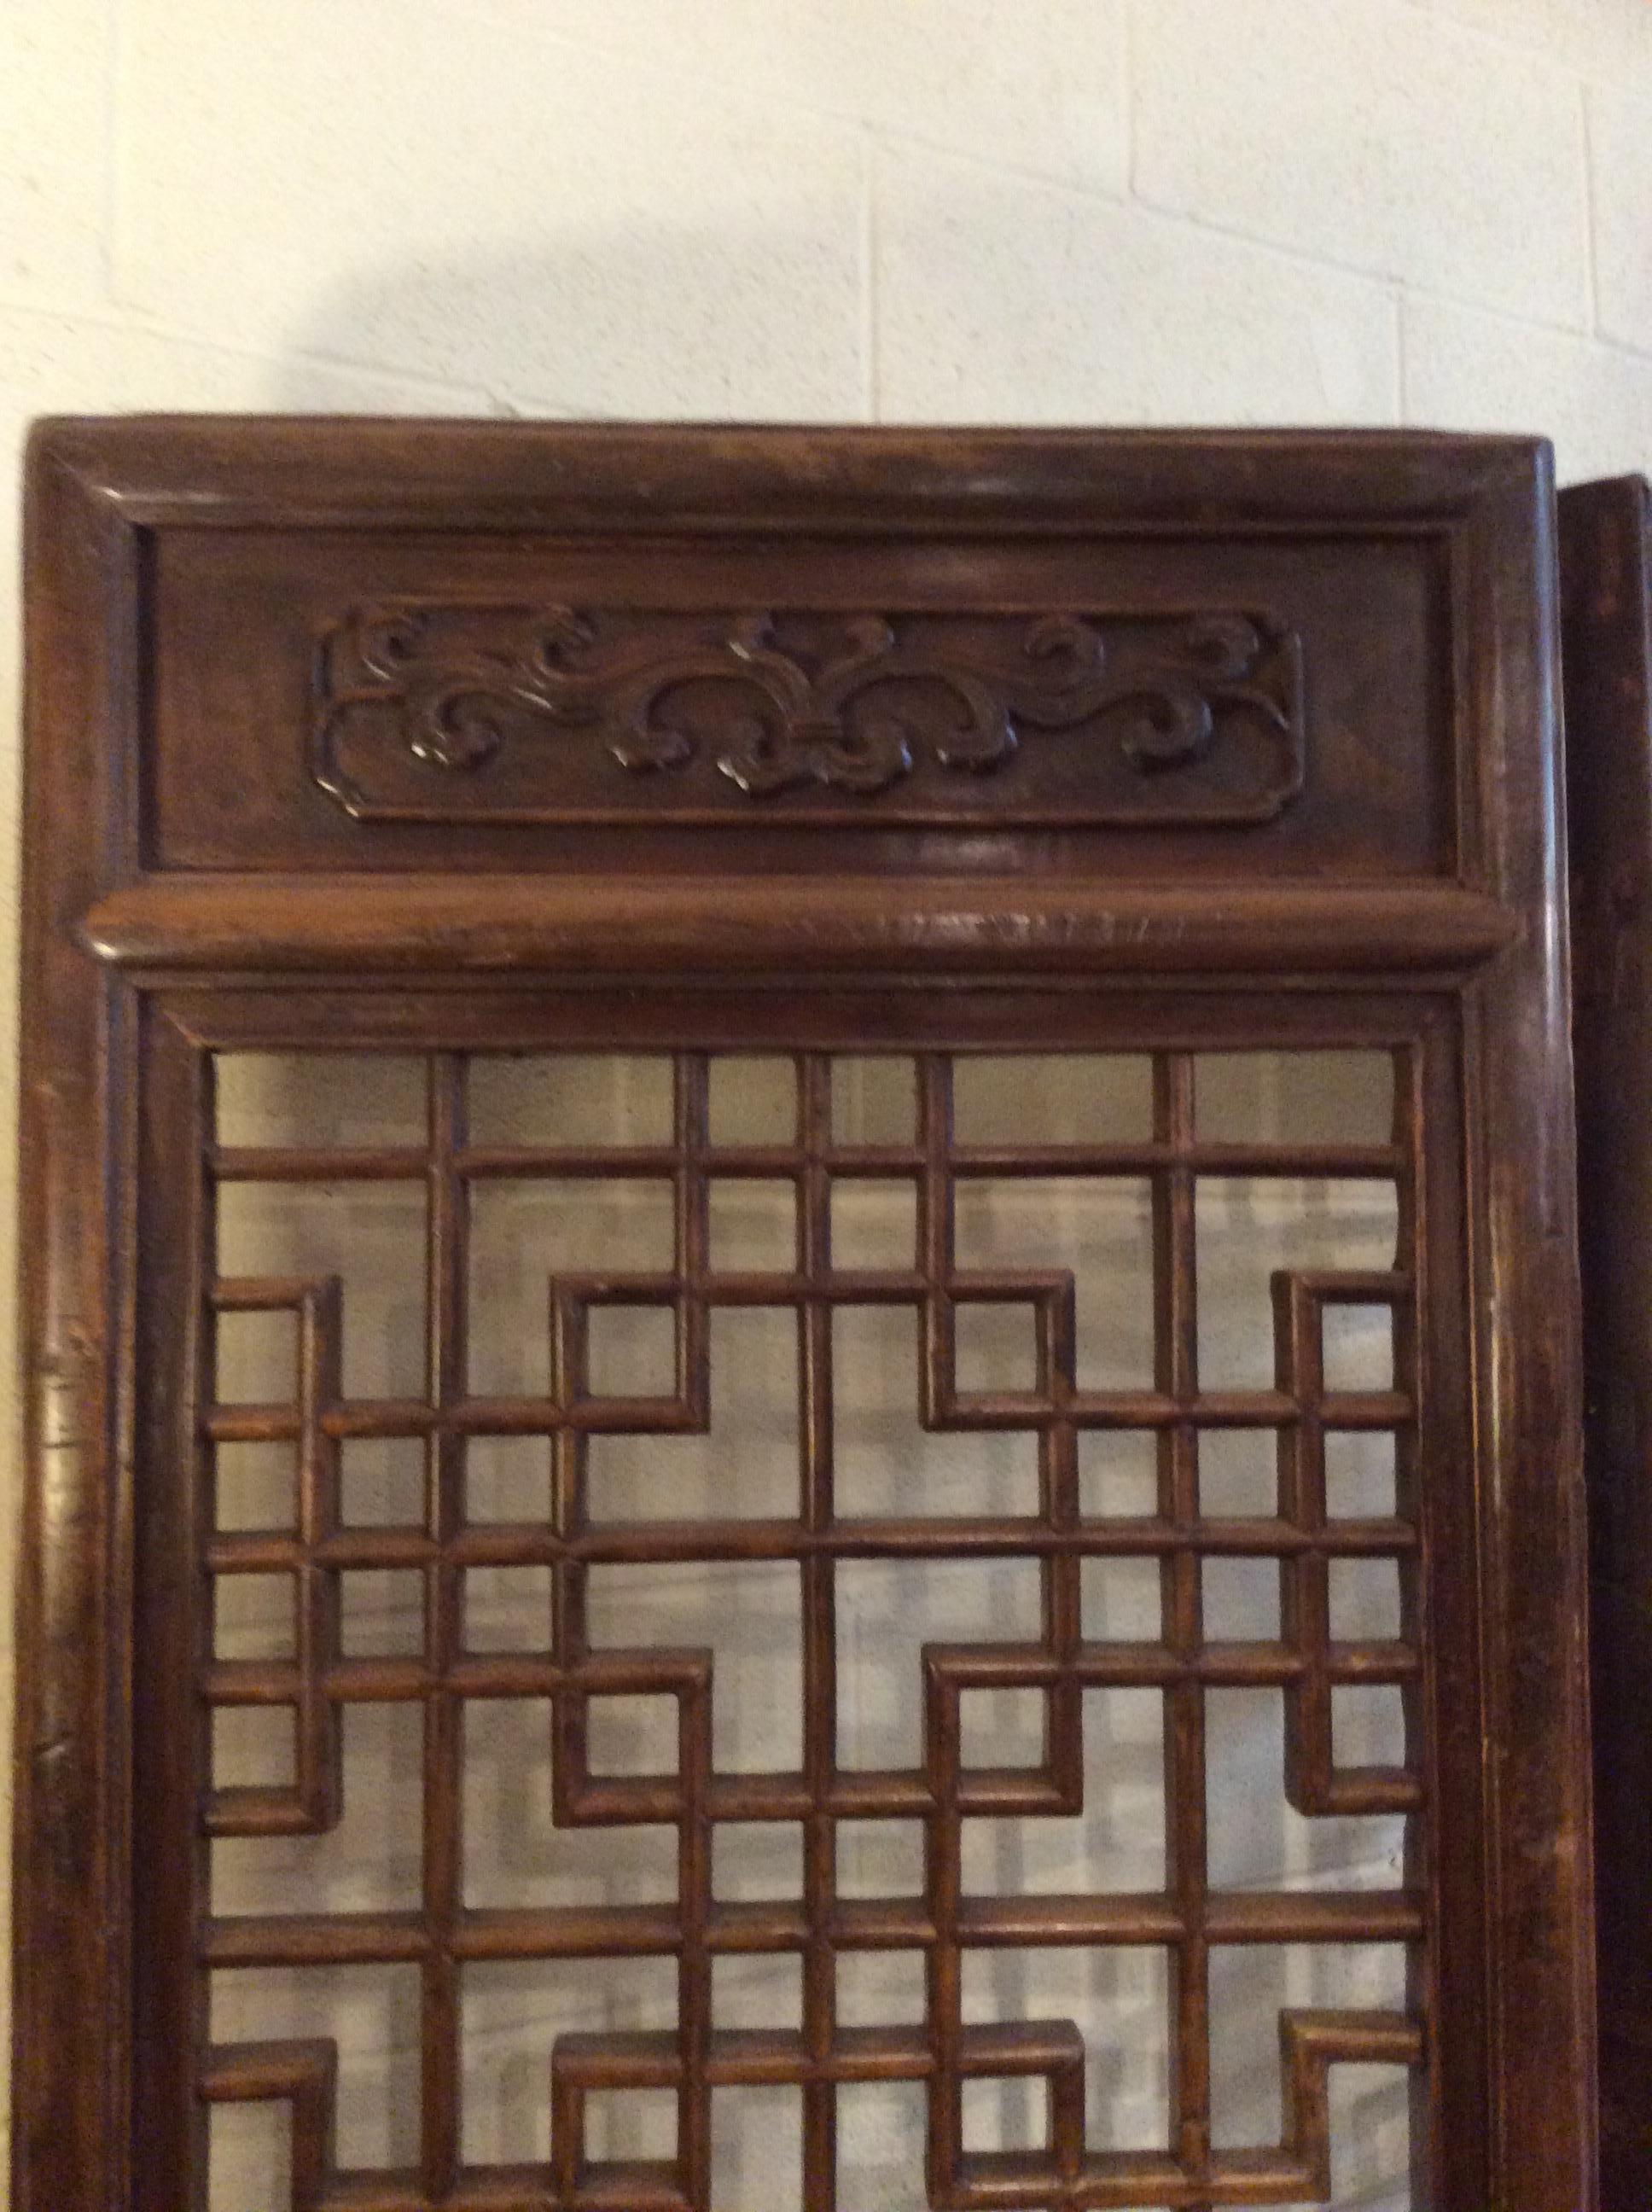 These monumental carved elm wood screens come form the Shanxi Province in China and are approximately 180 years old. The carvings at the top, middle and bottom signify good luck and happiness.
The open fretwork at the upper half of each panel